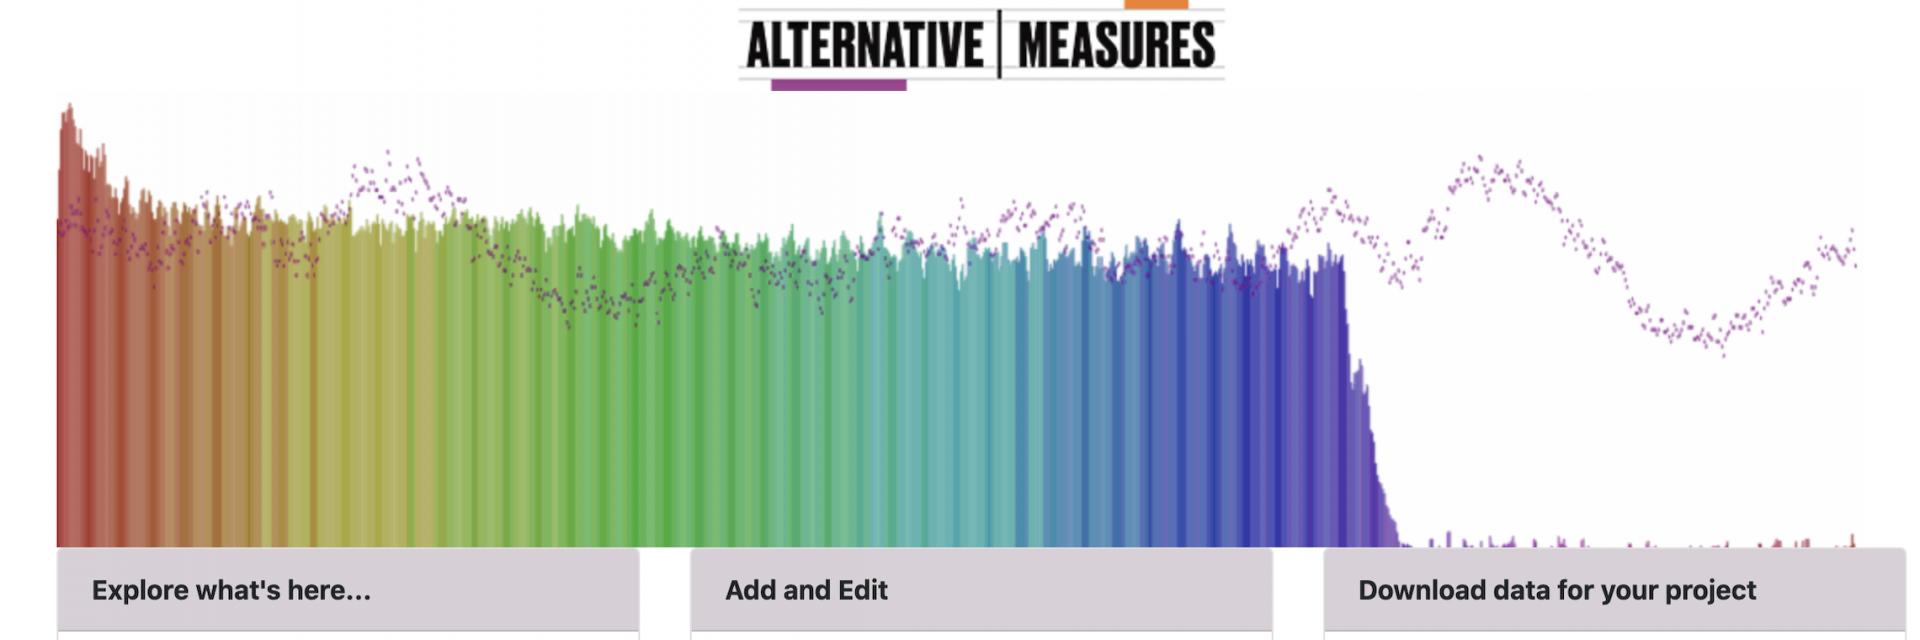 Visualization of data from Alternative Measures website